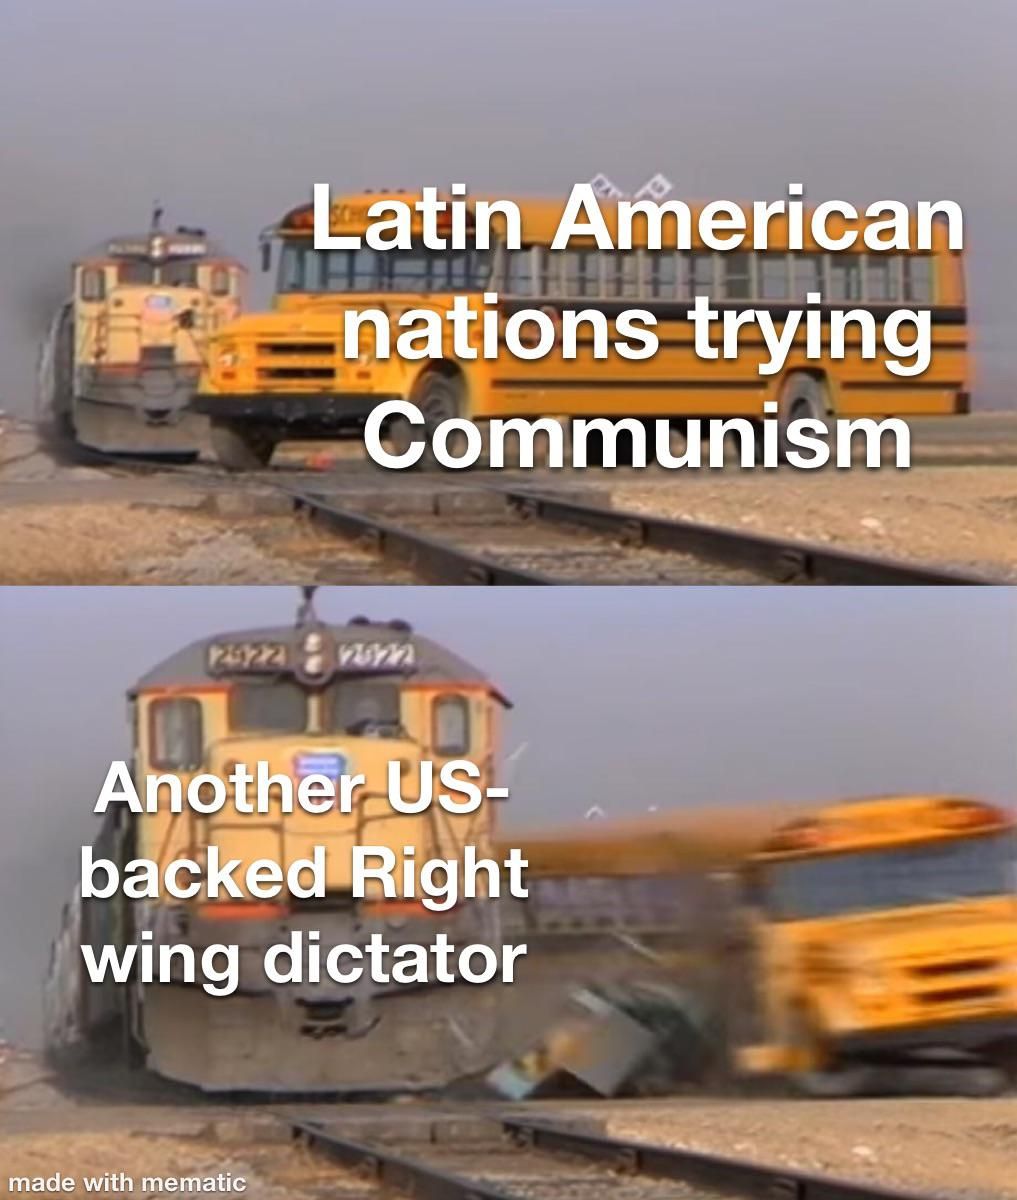 Latin America trying out communism during the Cold War be like